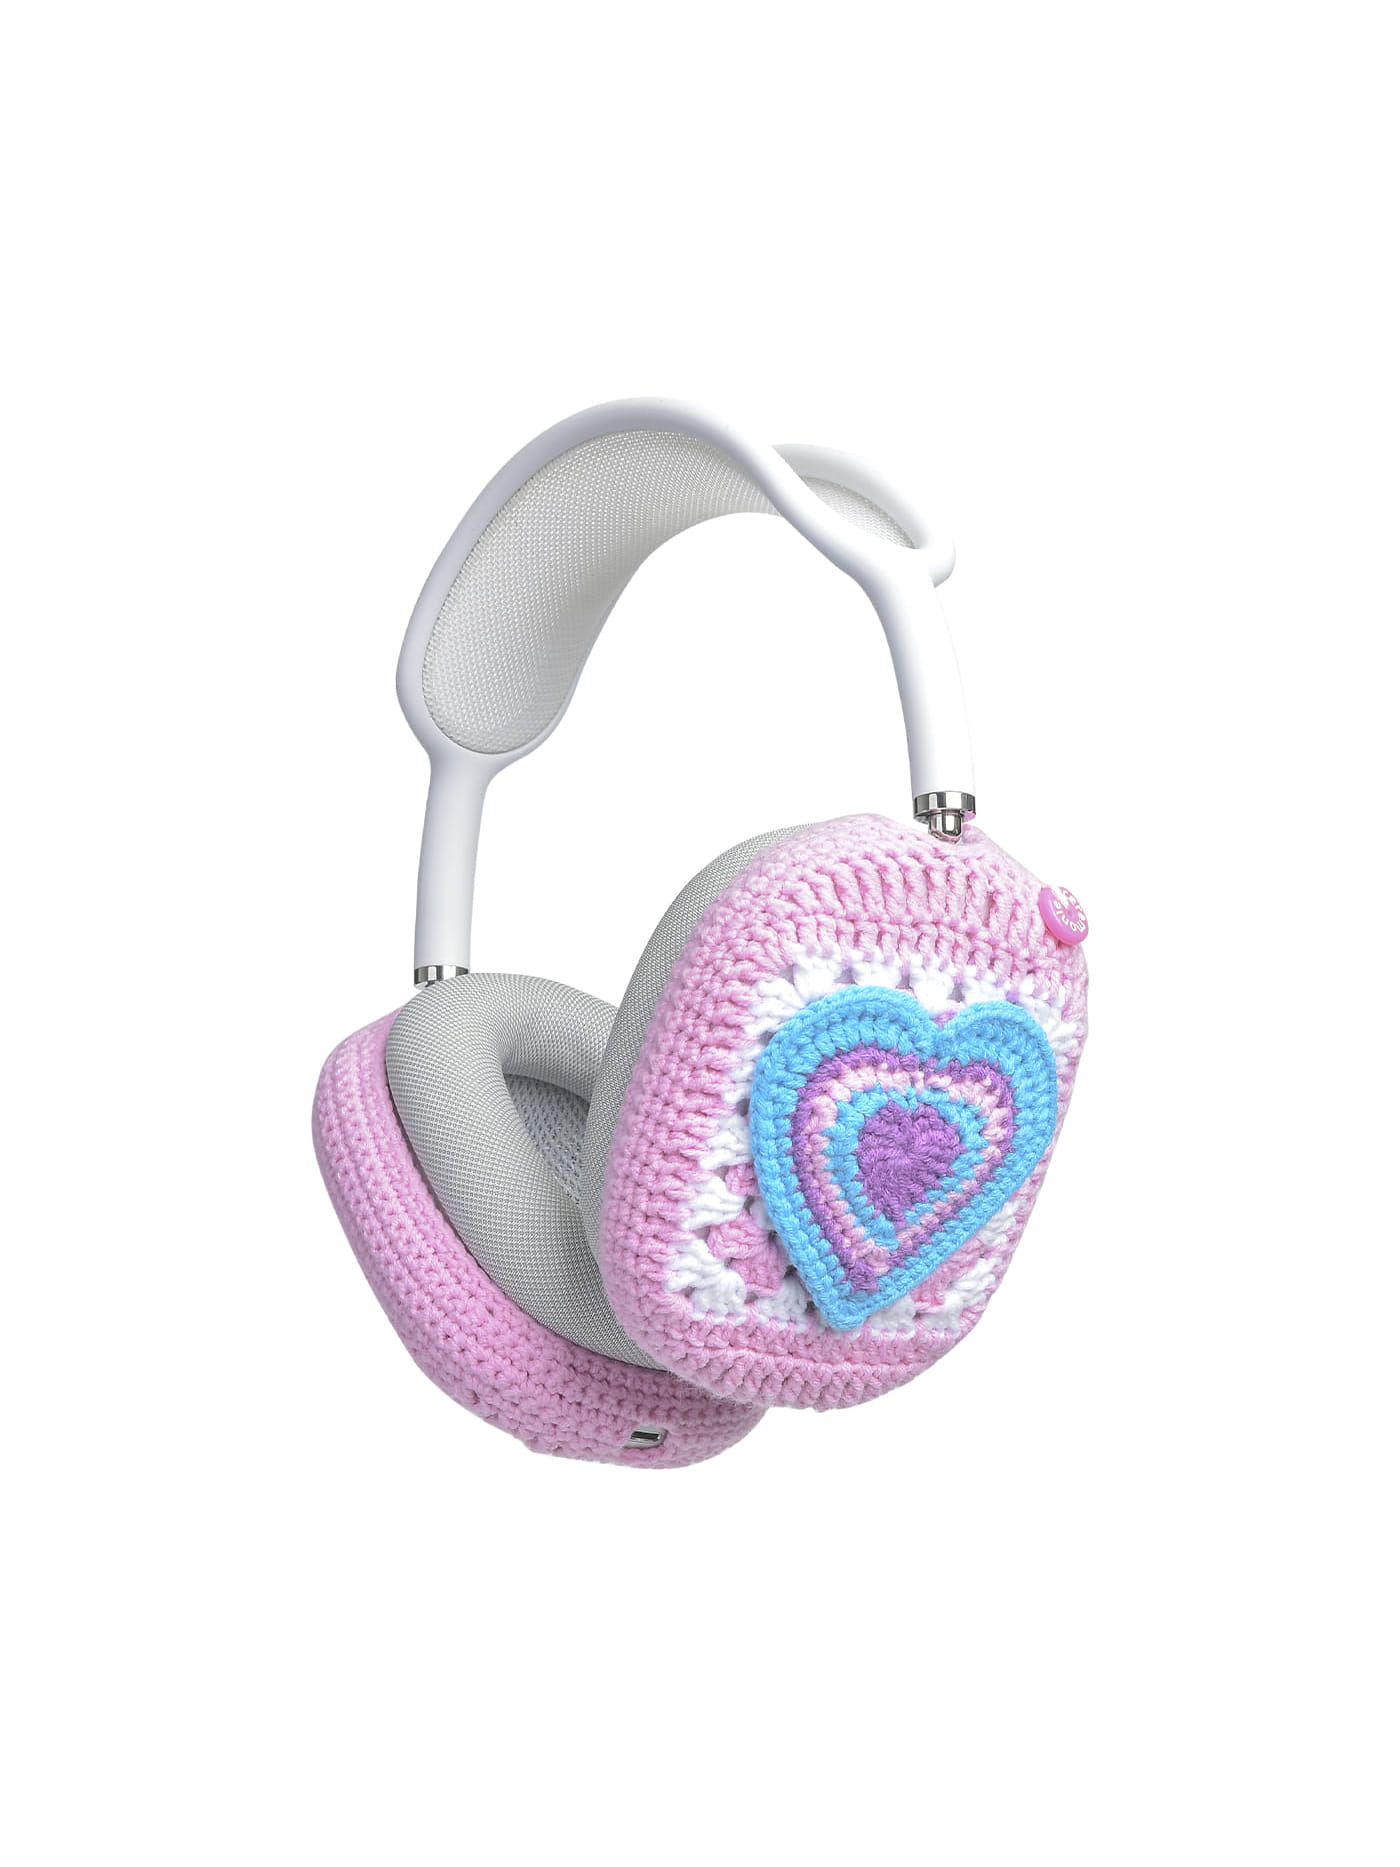 Airpods Max Case - Heart (Pink)